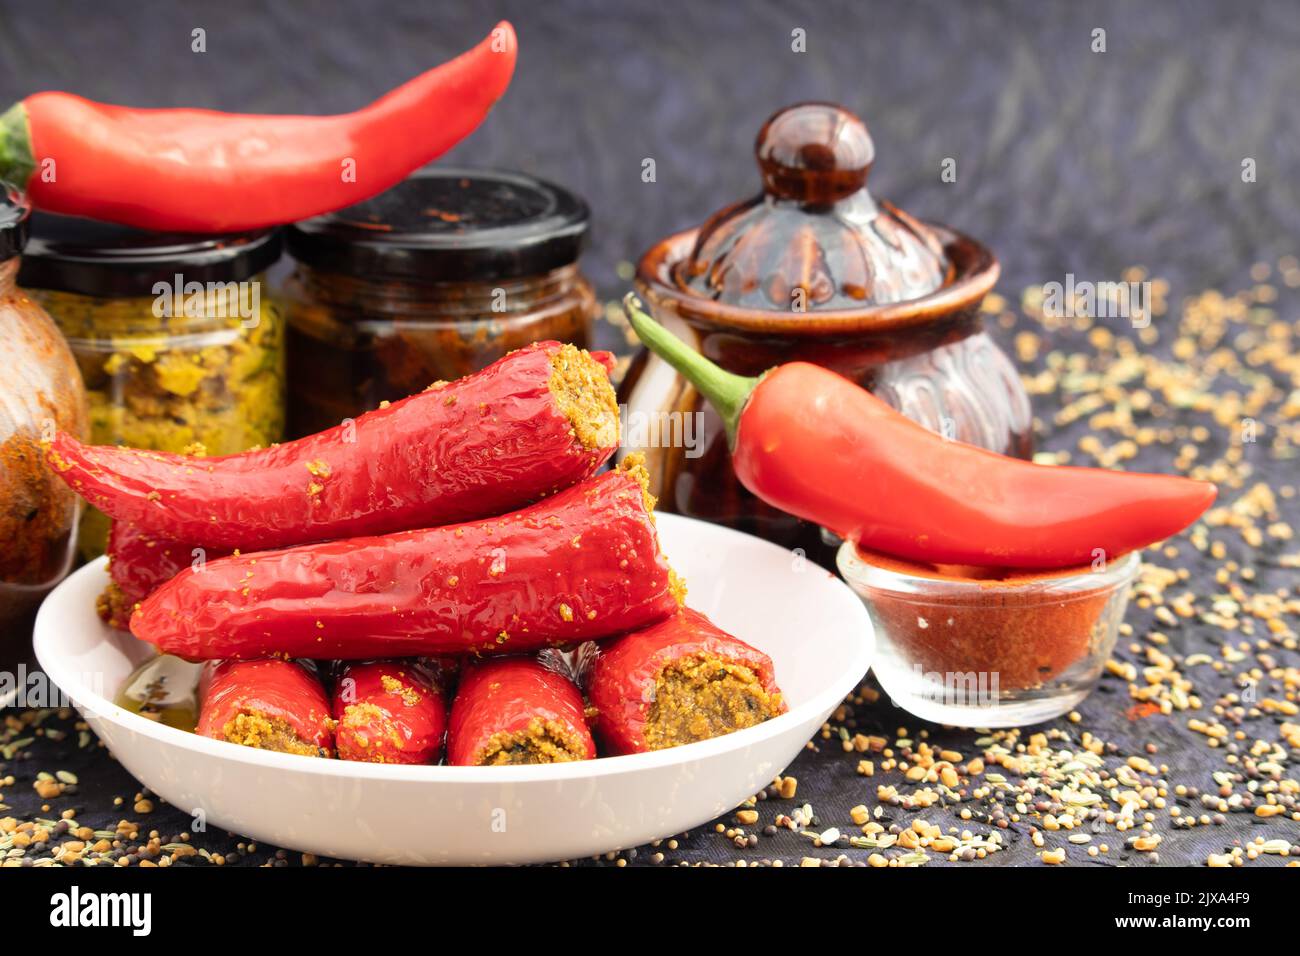 Traditional Homemade Red Chilli Pickle Also Known As Moti Teekhi Lal Mirch Ka Bharwa Bharua Achar Stuffed With Coarsely Powdered Masala Spices Like Se Stock Photo